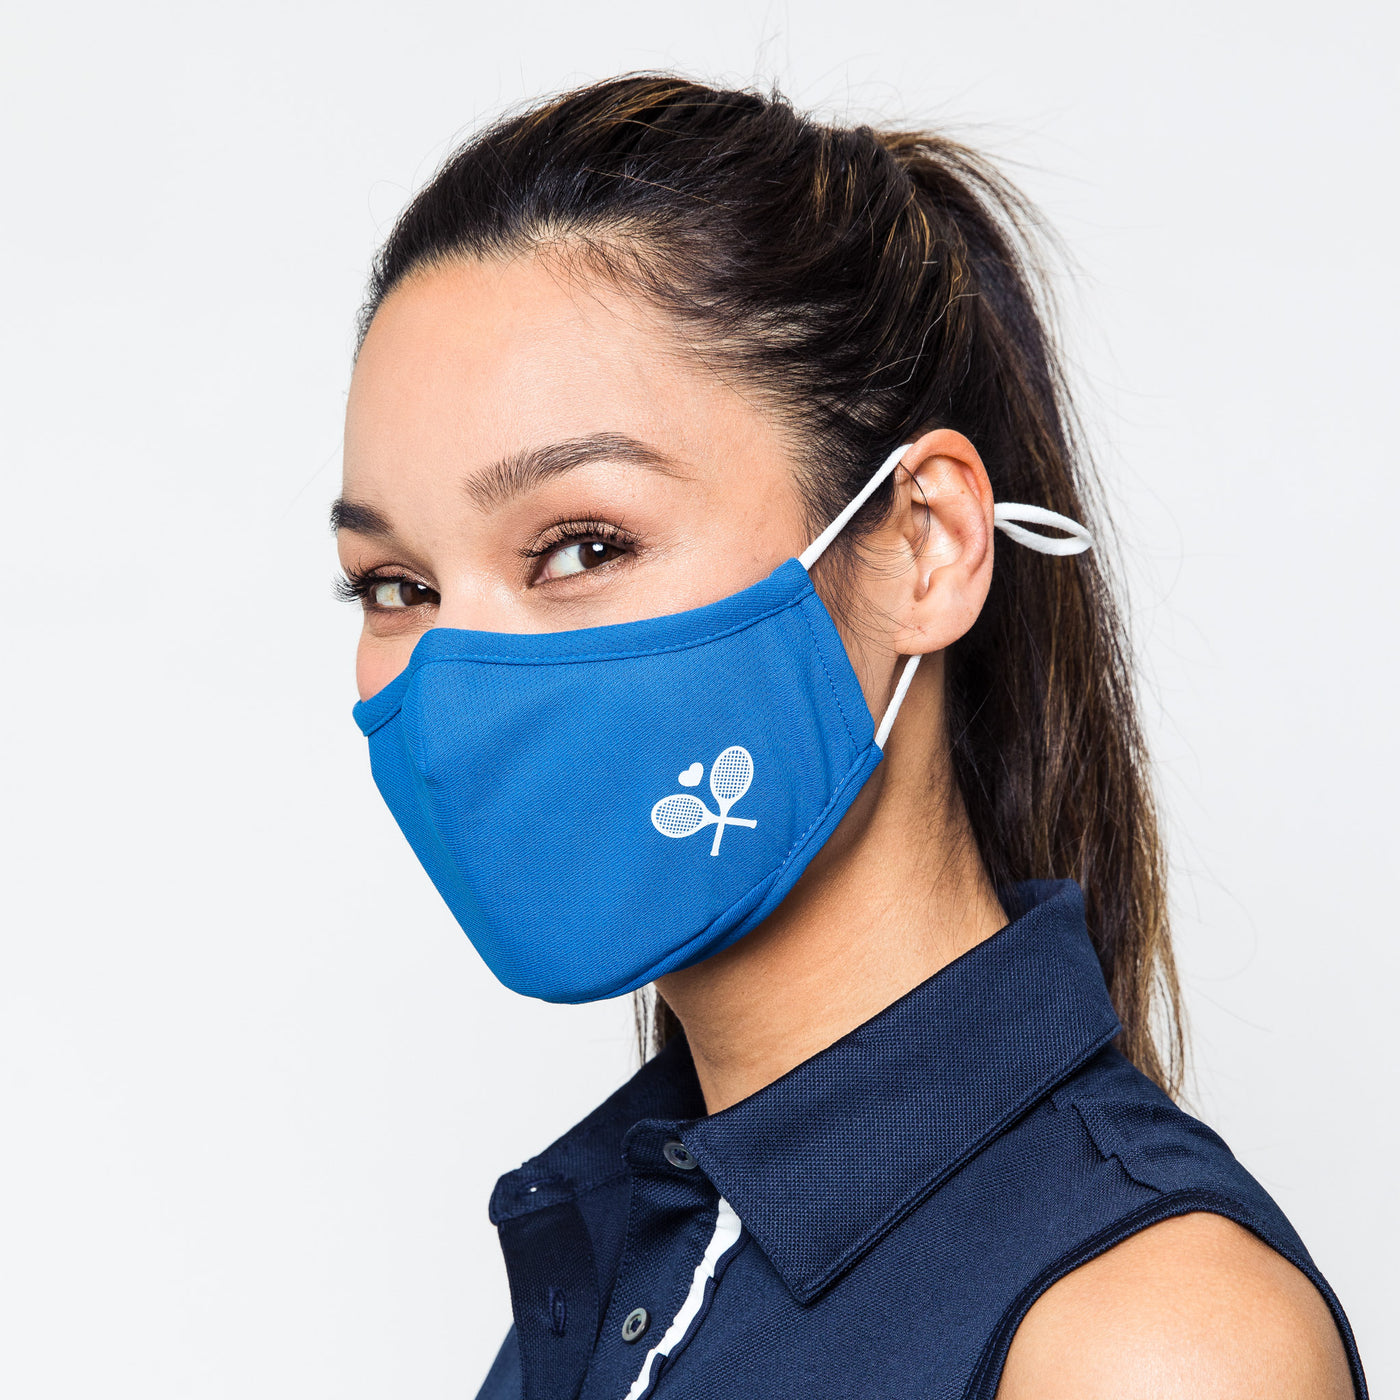 bright blue face mask with white crossed racquets printed on one side